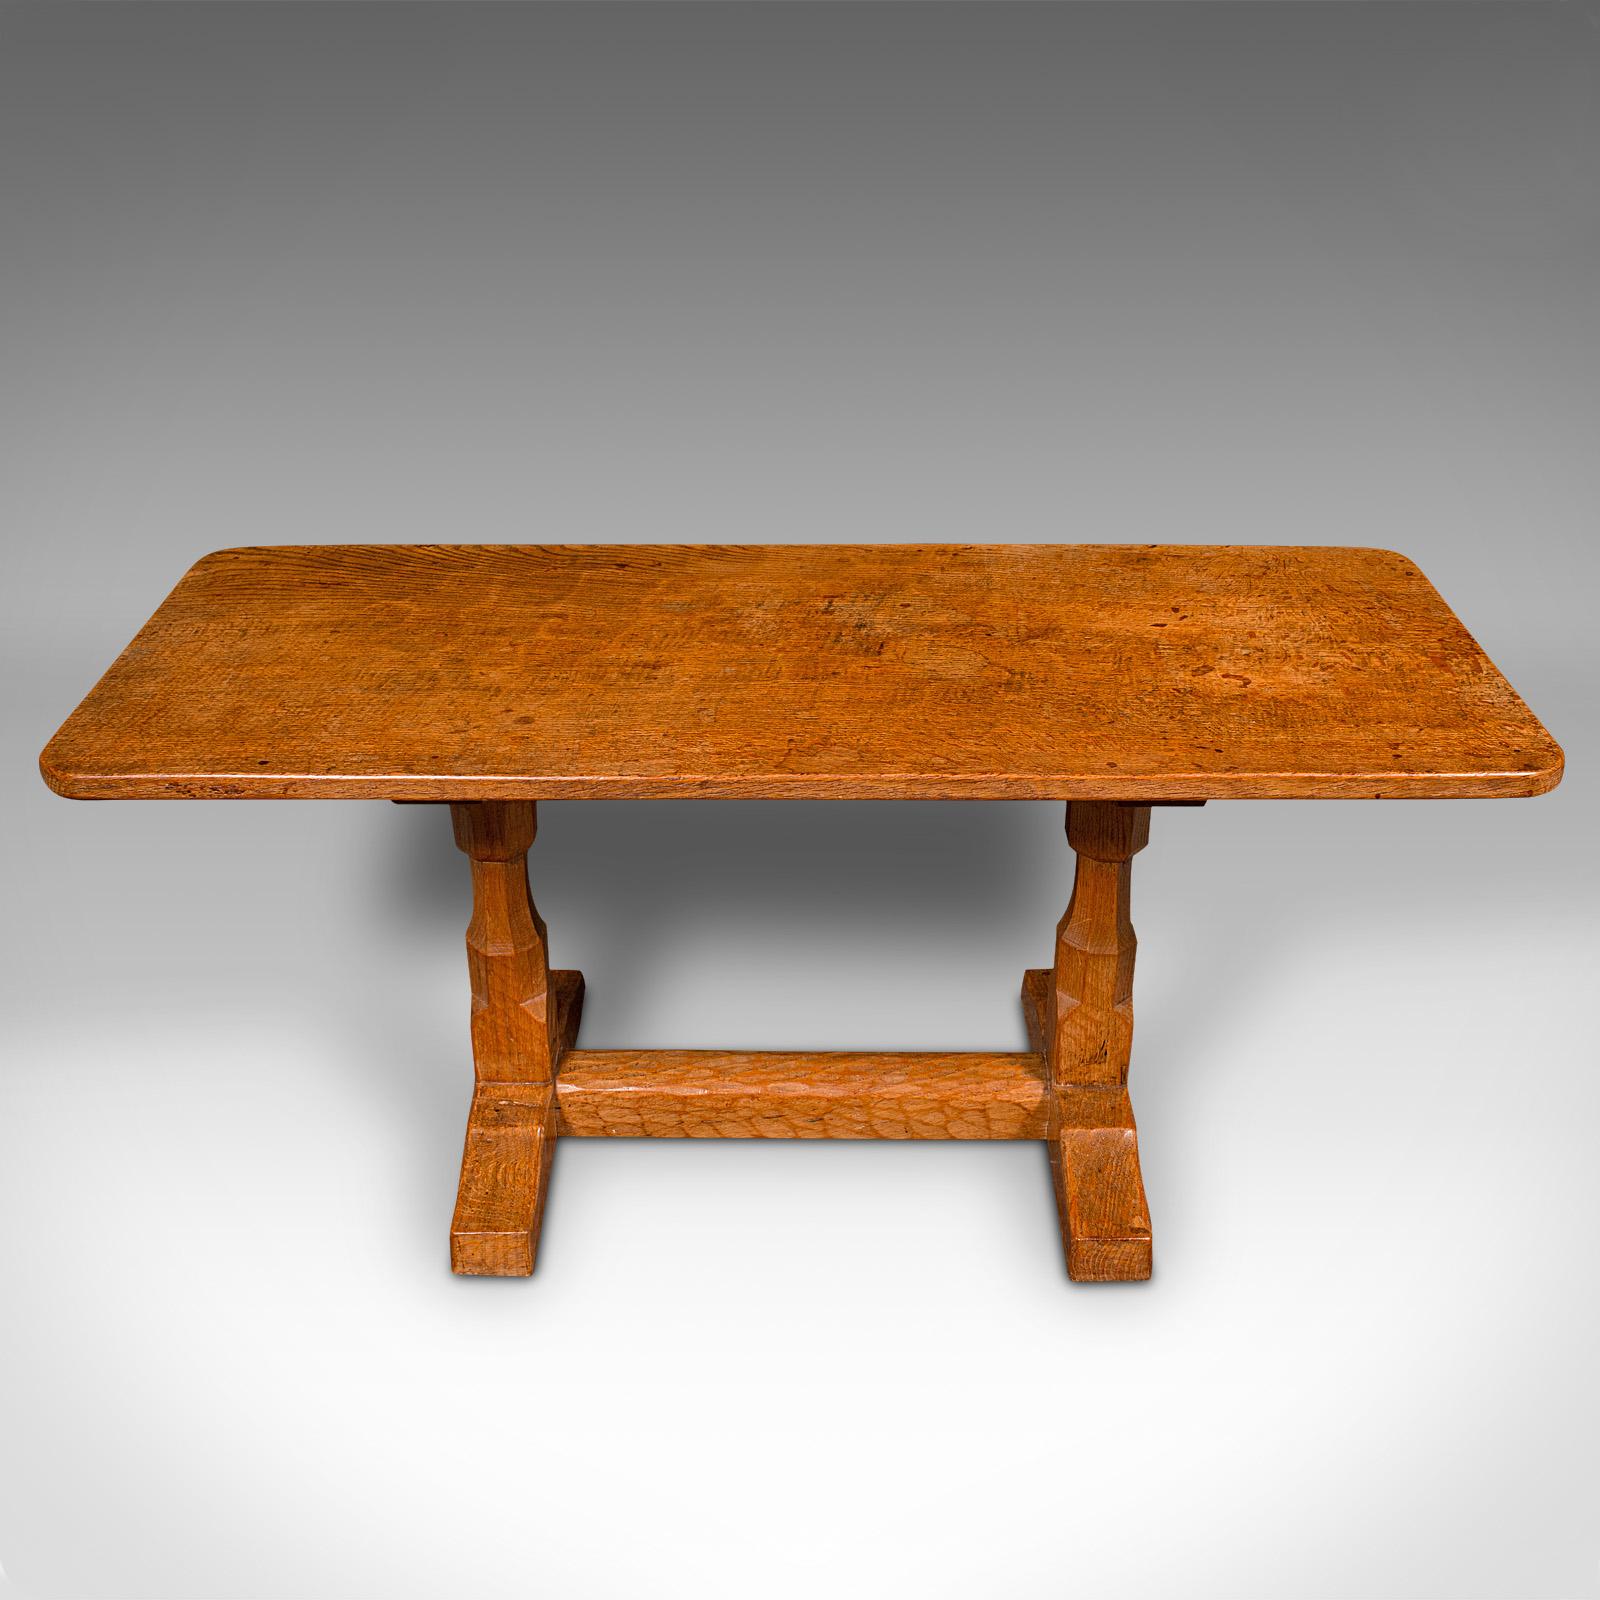 This is a vintage coffee table. An English, oak decorative lounge table in the manner of Robert Thompson 'Mouseman', dating to the late 20th century, circa 1970.

Delightful coffee table with a distinctive aesthetic appeal
Displays a desirable aged